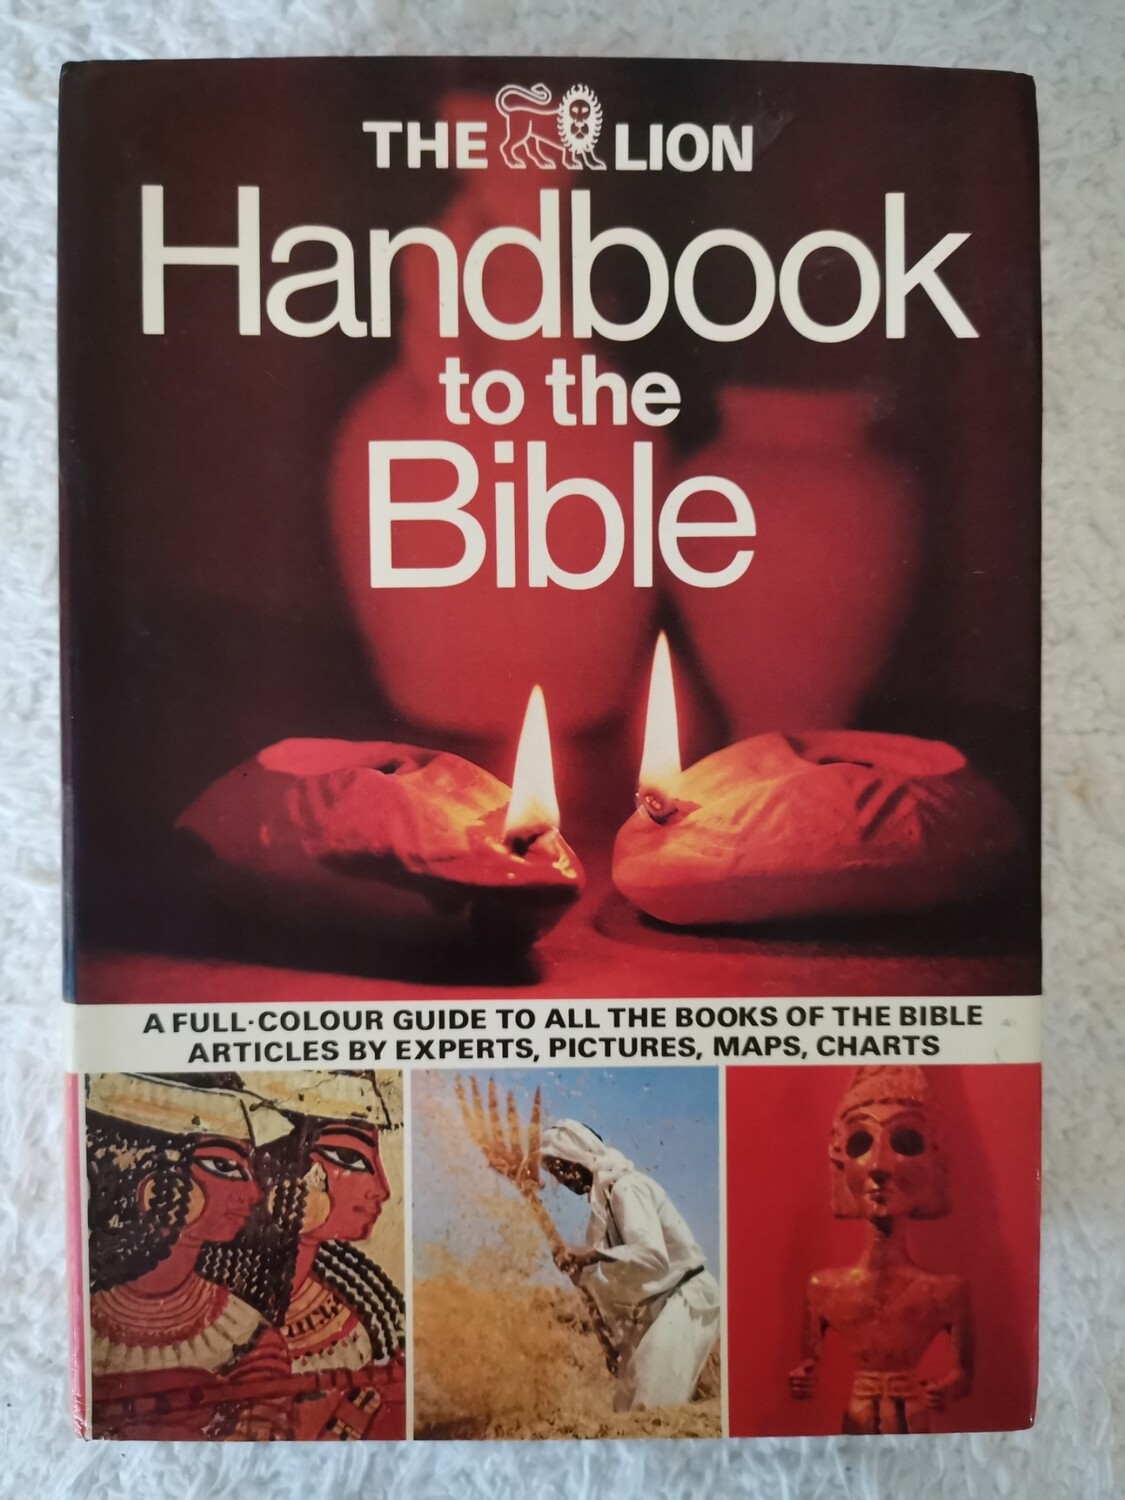 The lion handbook to the Bible